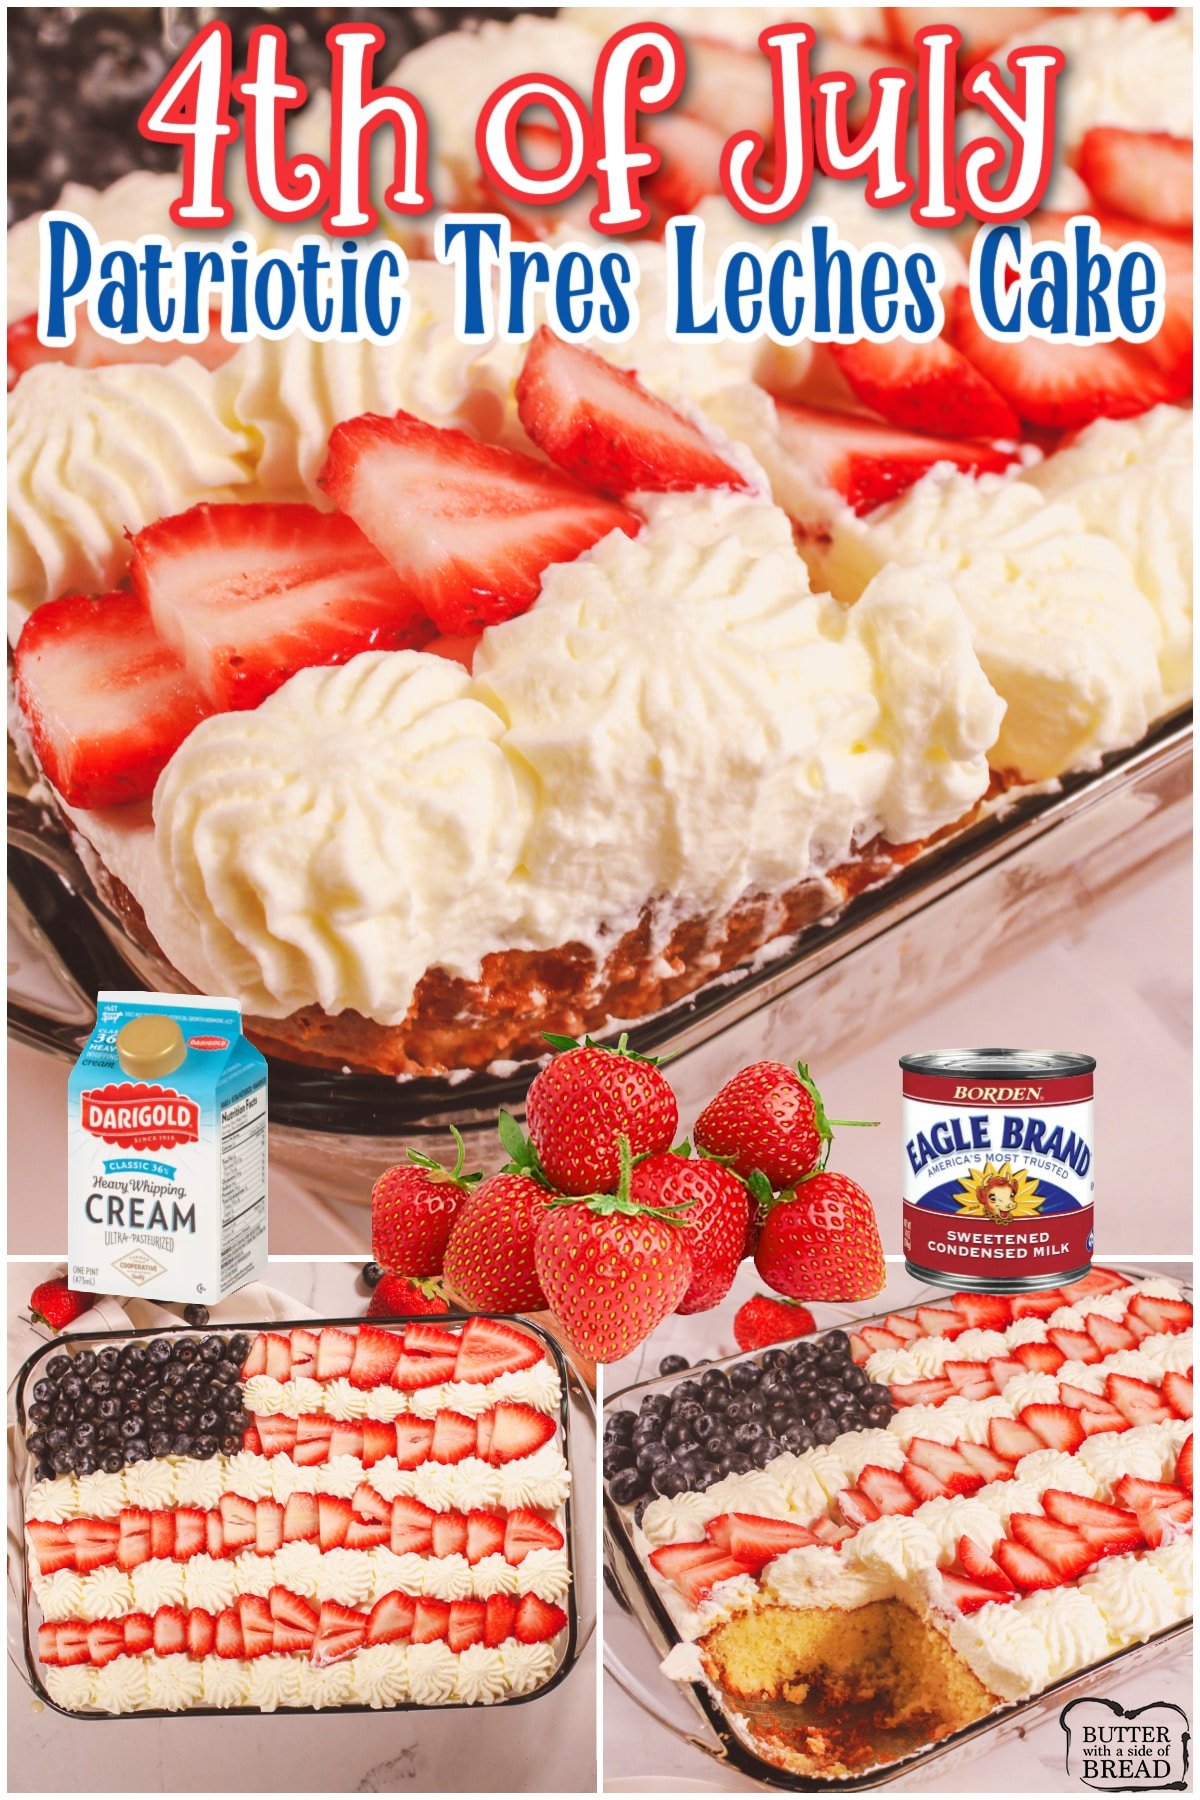 Strawberry Tres Leches Cake is made with a boxed cake mix, a 3 milk syrup & topped with whipped cream and fresh berries! This tres leches cake recipe is a simple way to create a traditional, festive dessert!